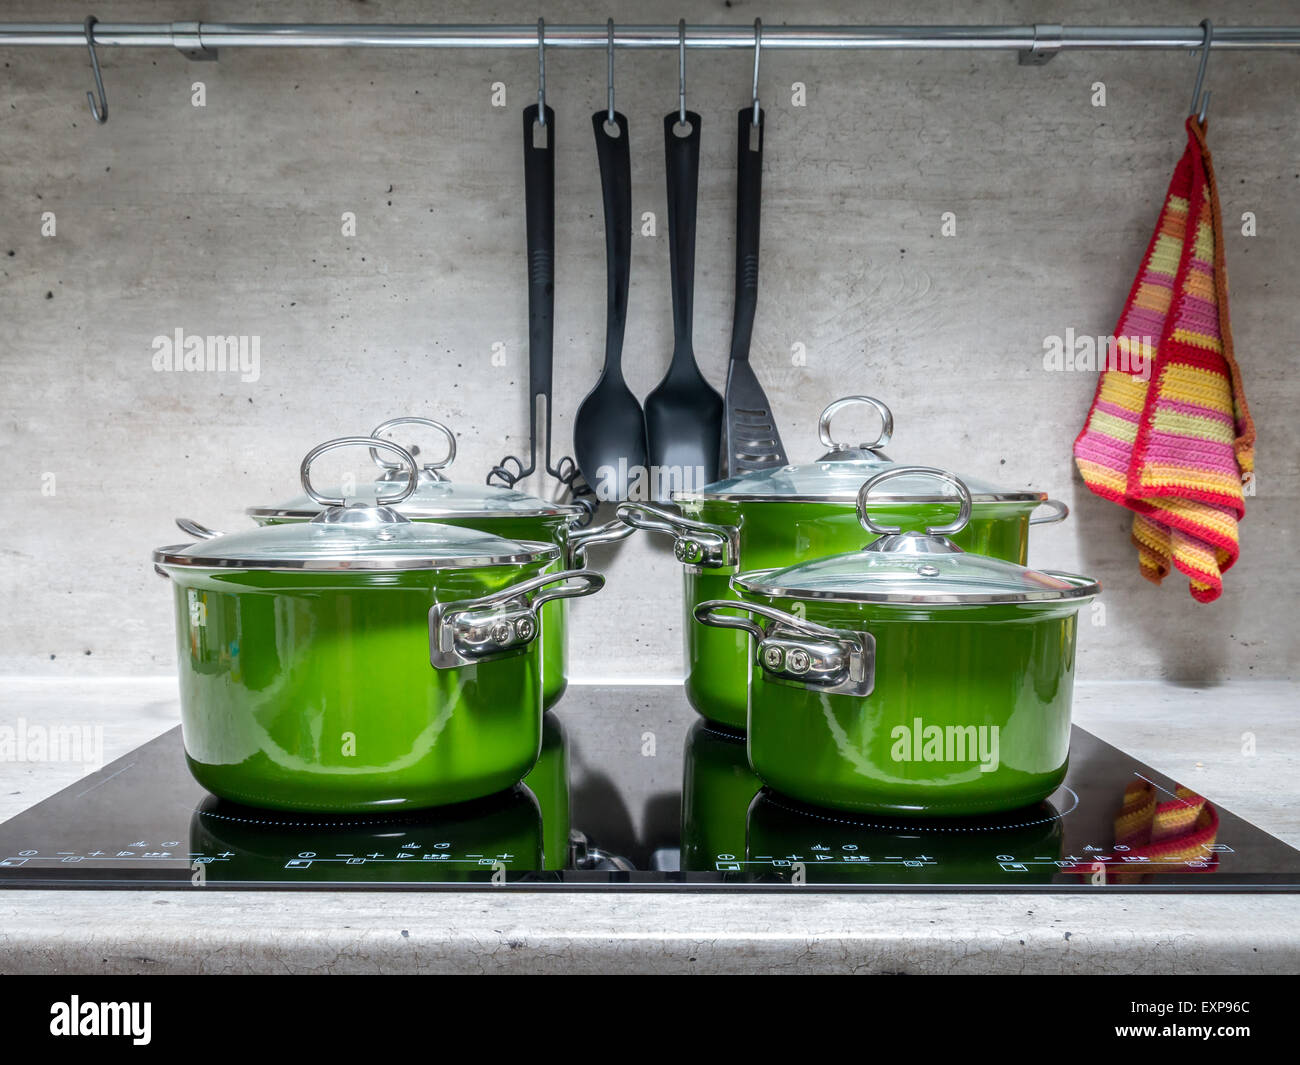 Four green enamel stewpots on black induction cooker Stock Photo